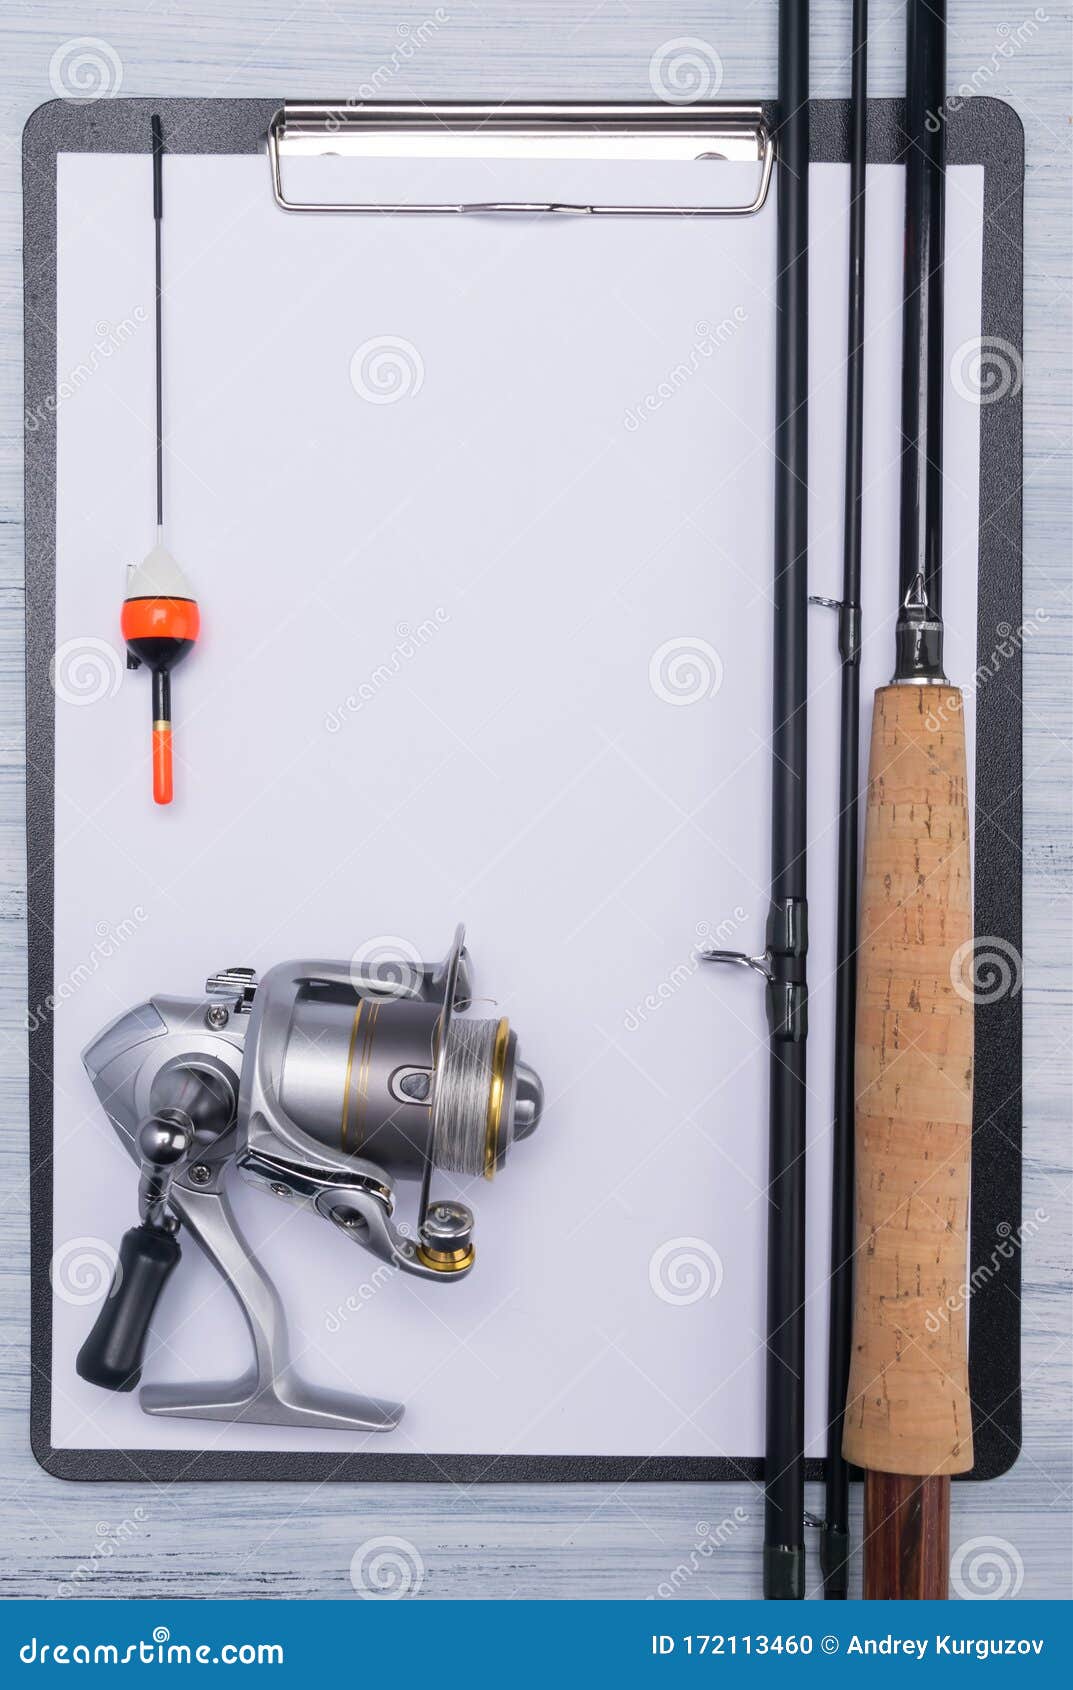 https://thumbs.dreamstime.com/z/close-up-wooden-handle-fishing-rod-reel-line-float-sheet-paper-place-writing-172113460.jpg